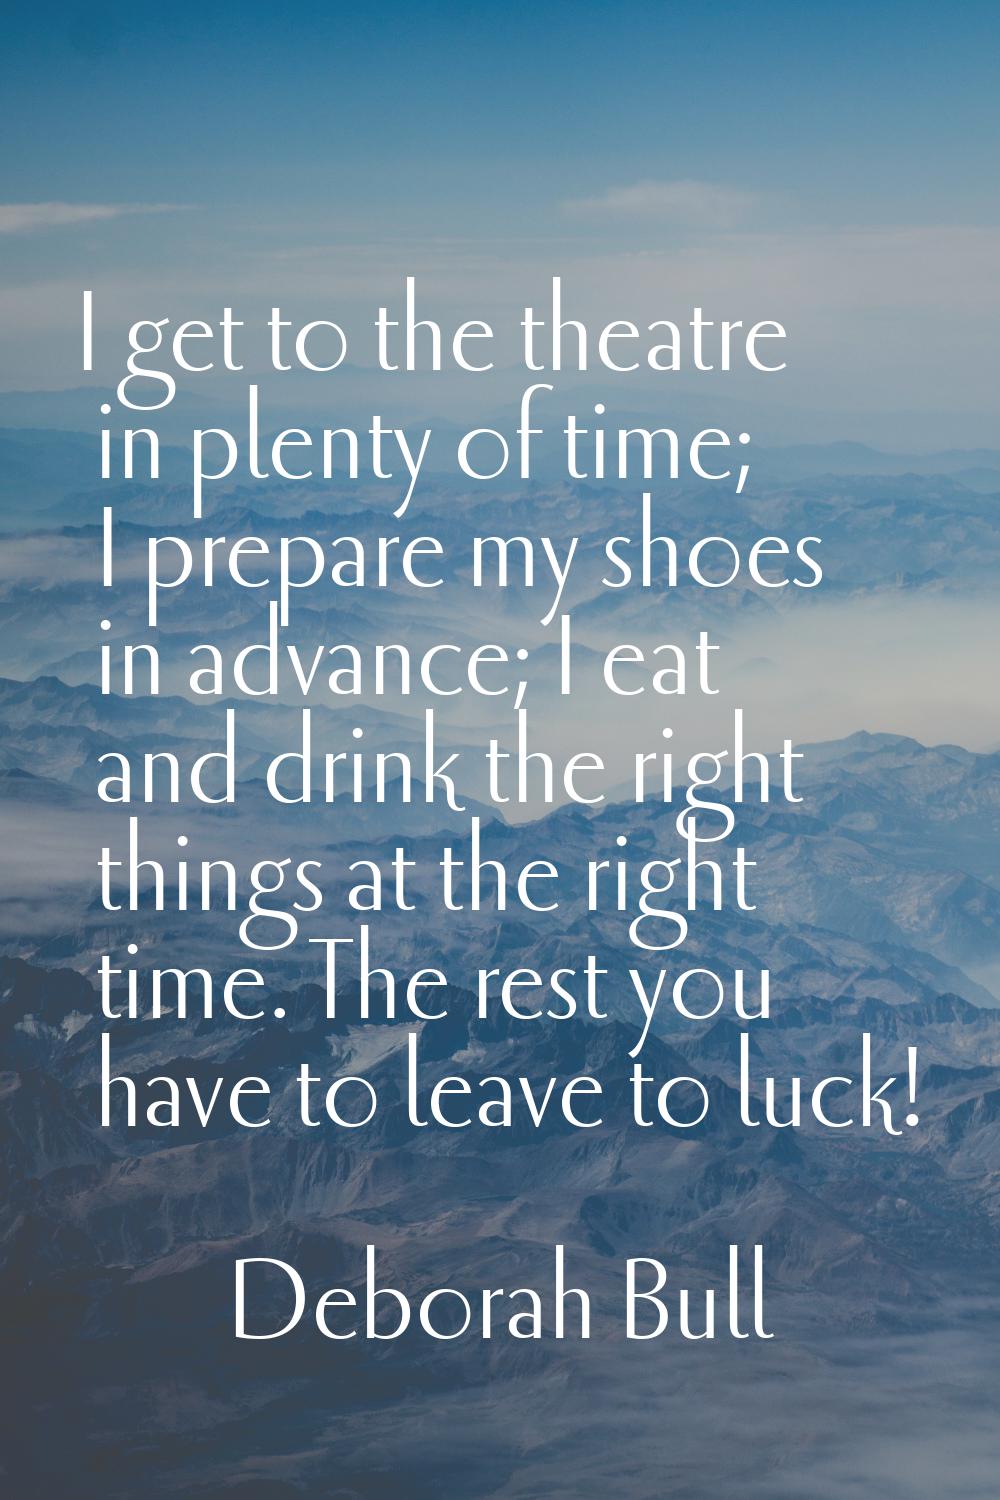 I get to the theatre in plenty of time; I prepare my shoes in advance; I eat and drink the right th